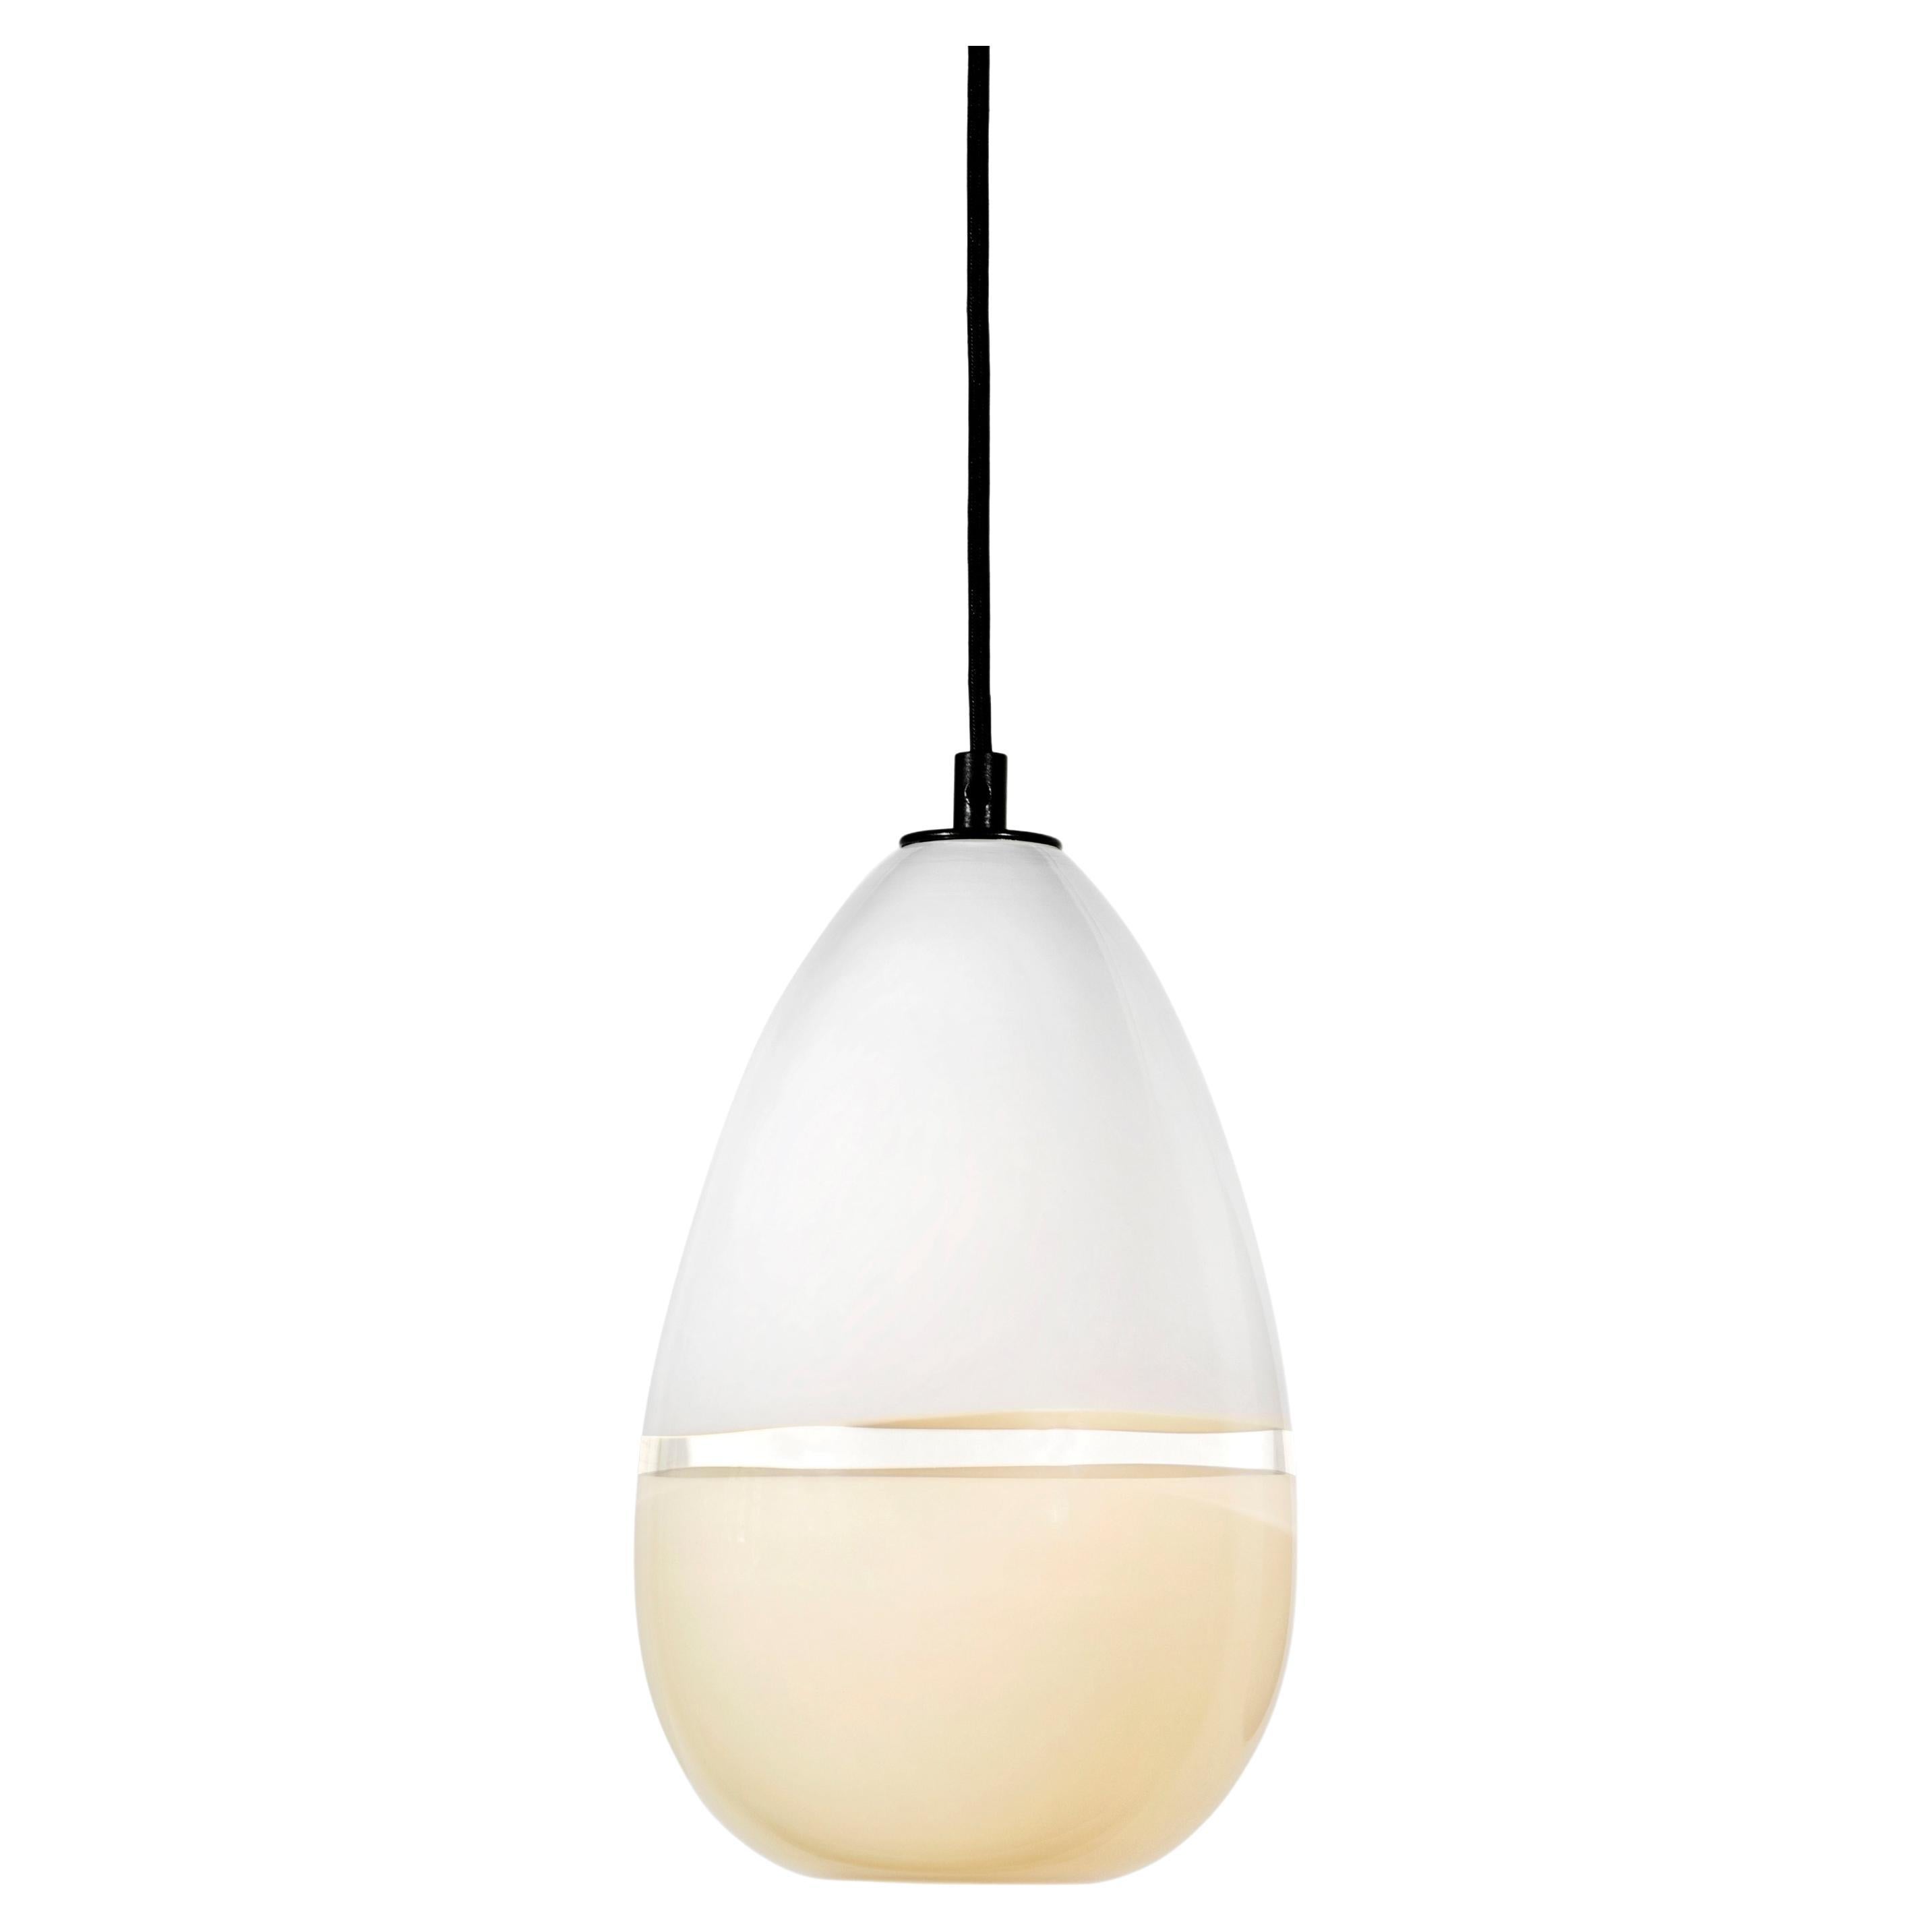 Lattimo Large Teardrop Pendant Light, Hand Blown Glass - Made to Order For Sale